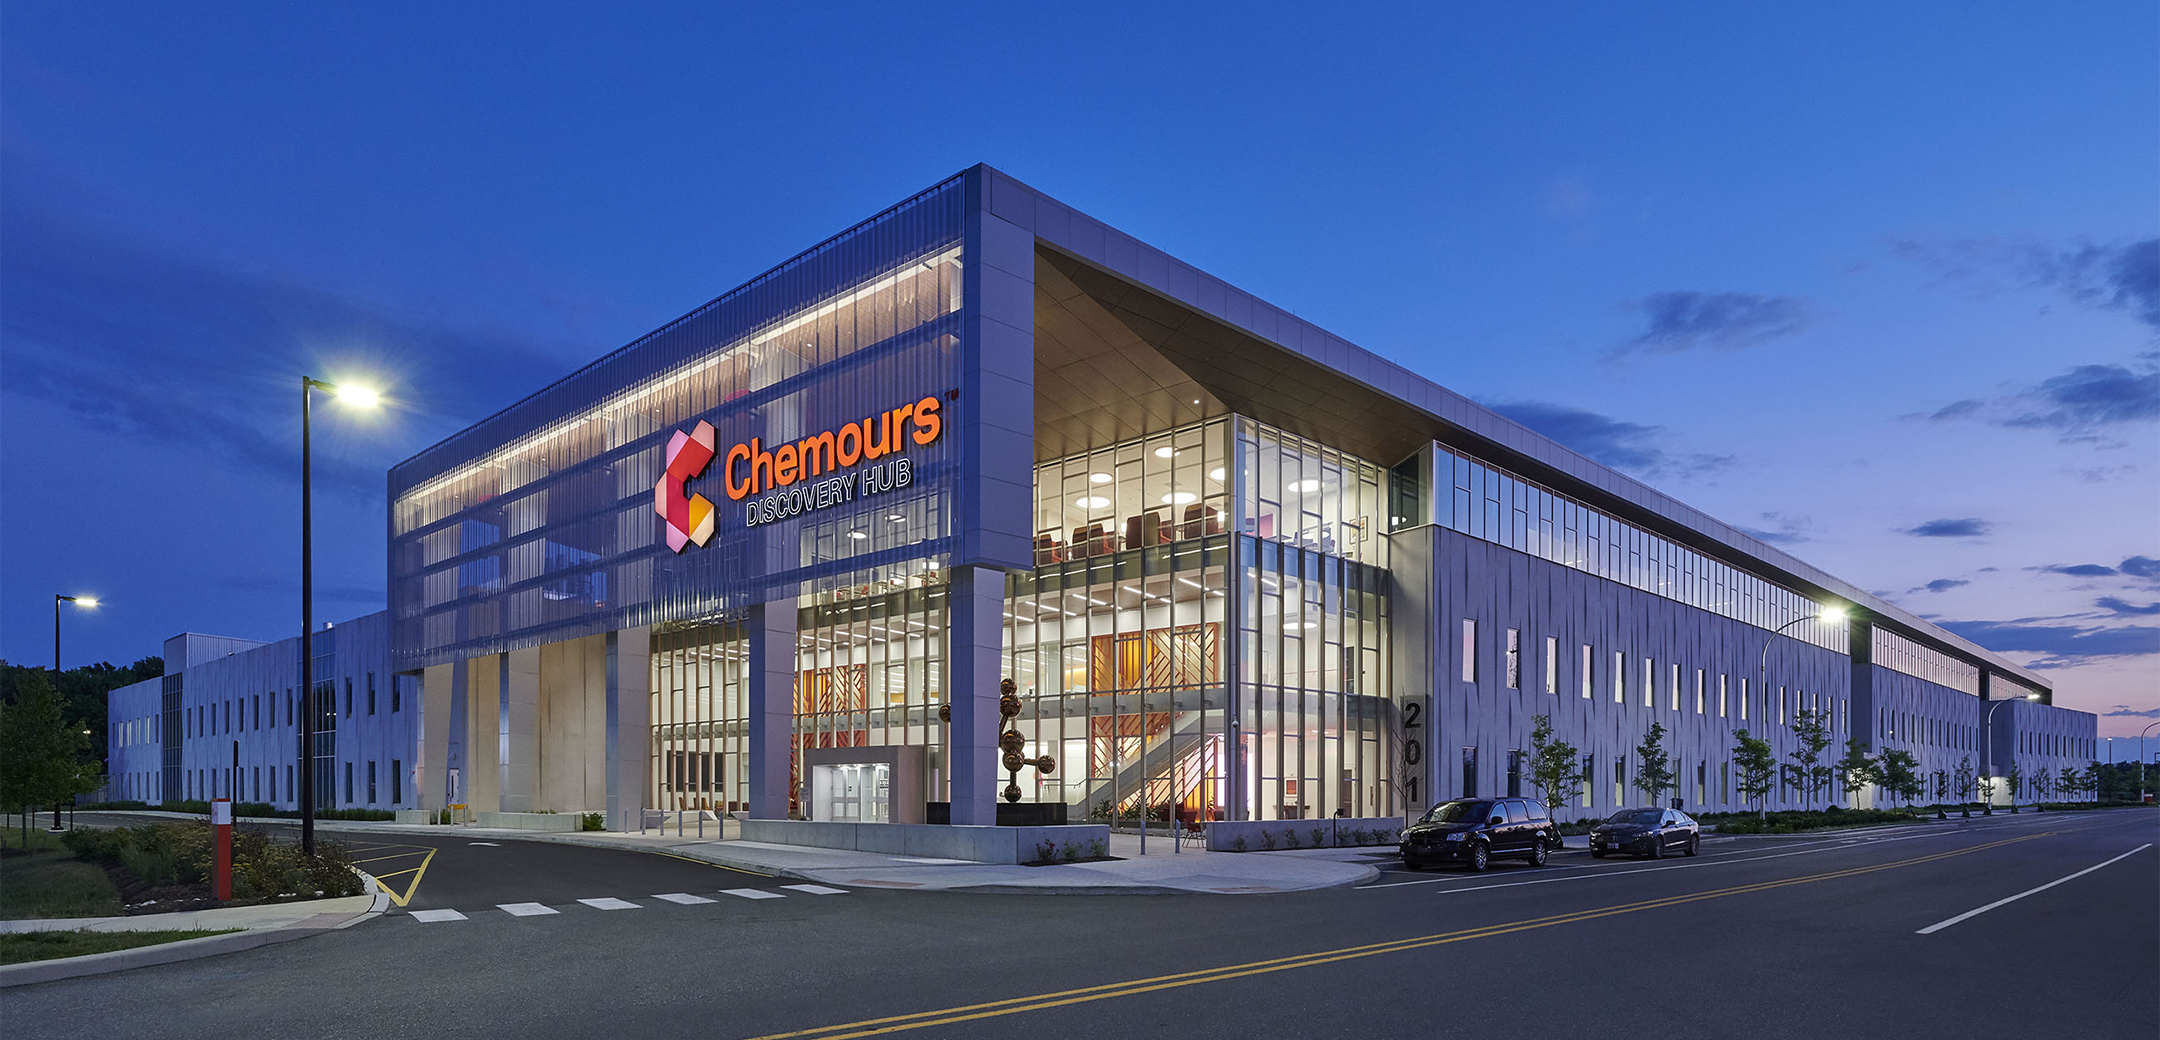 Nightime photo showing the exterior of Chemours Discovery Hub, commercial and science & technology project in Newark, DE.